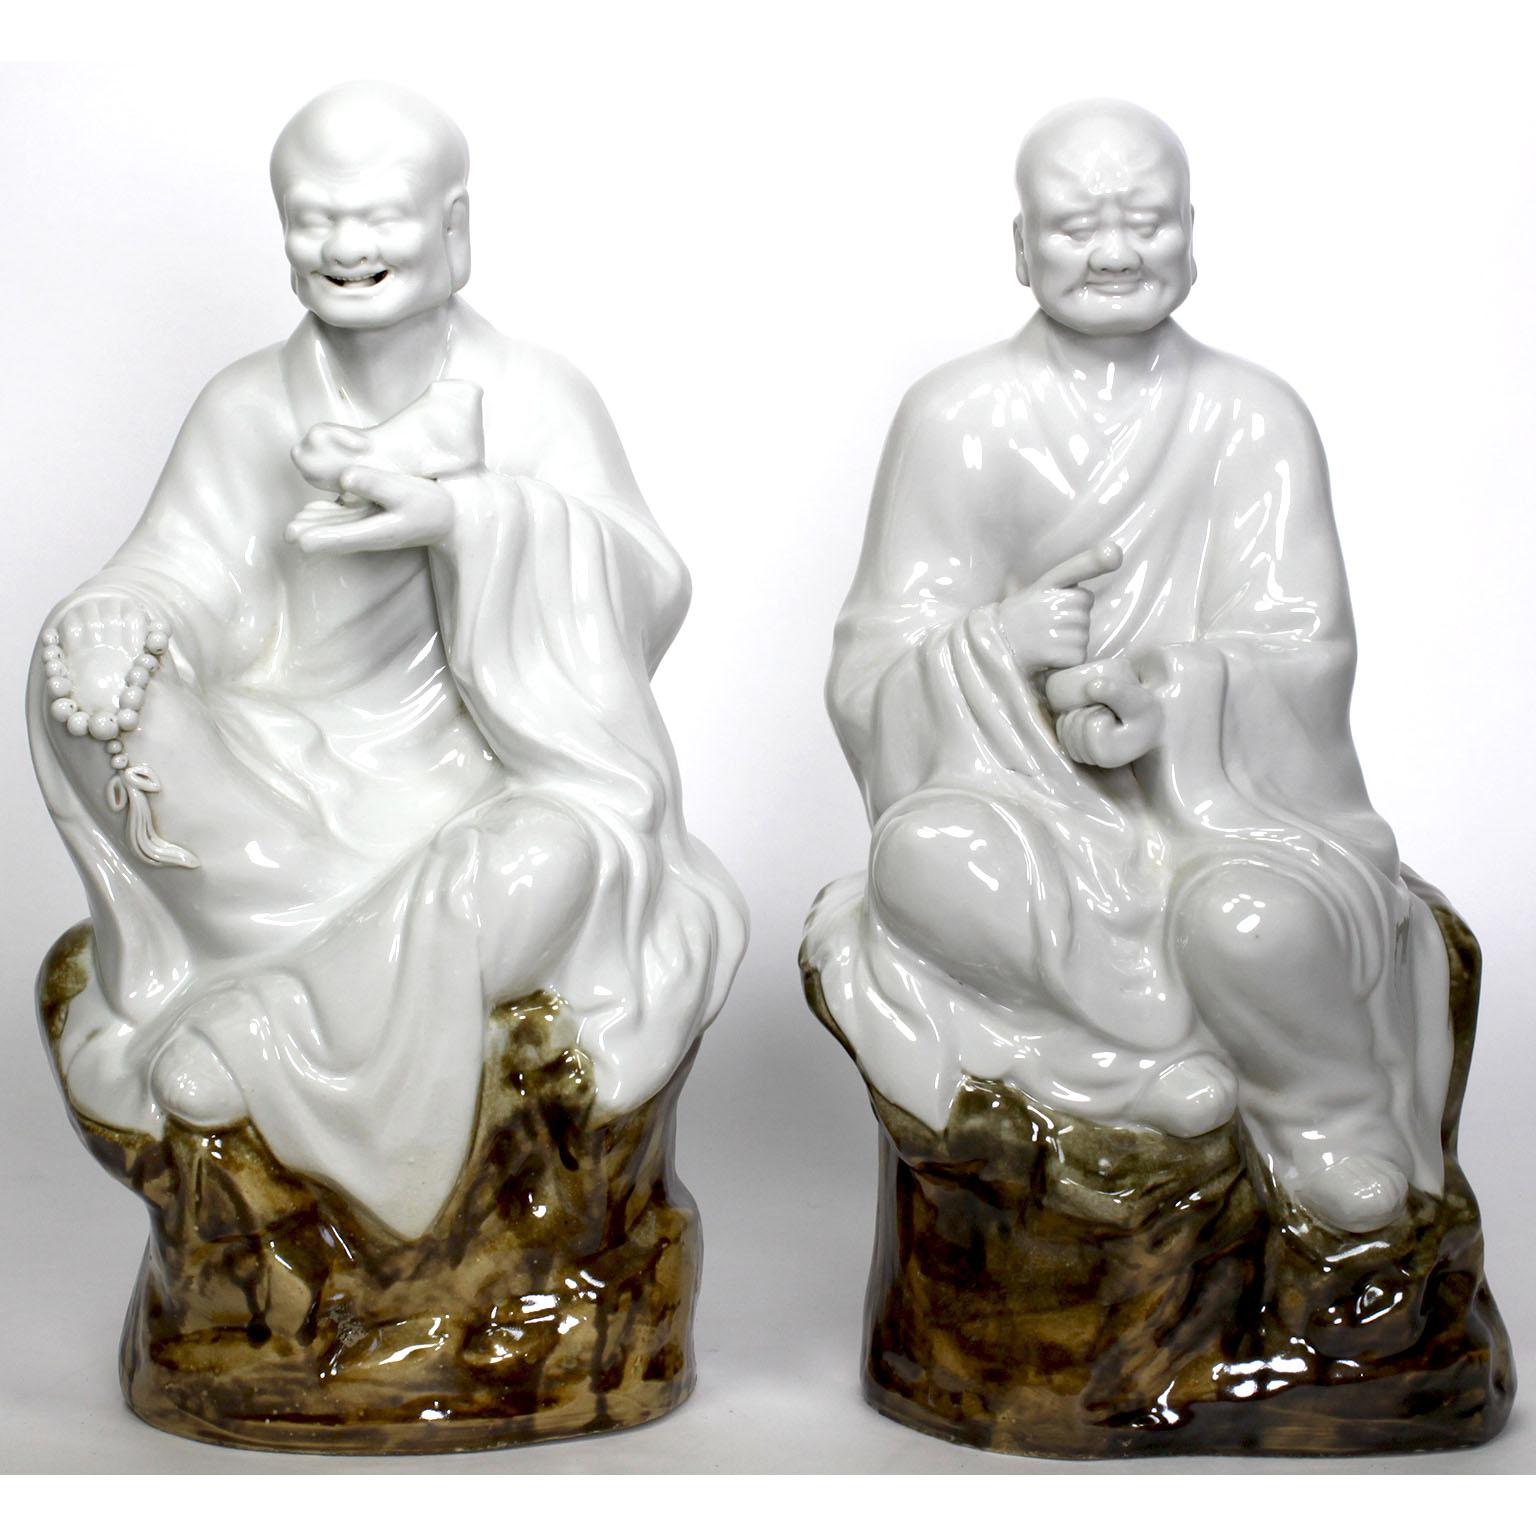 Glazed Chinese Set of Eighteen Blanc de Chine Enameled Ceramic Arhats or Luohan Buddhas For Sale